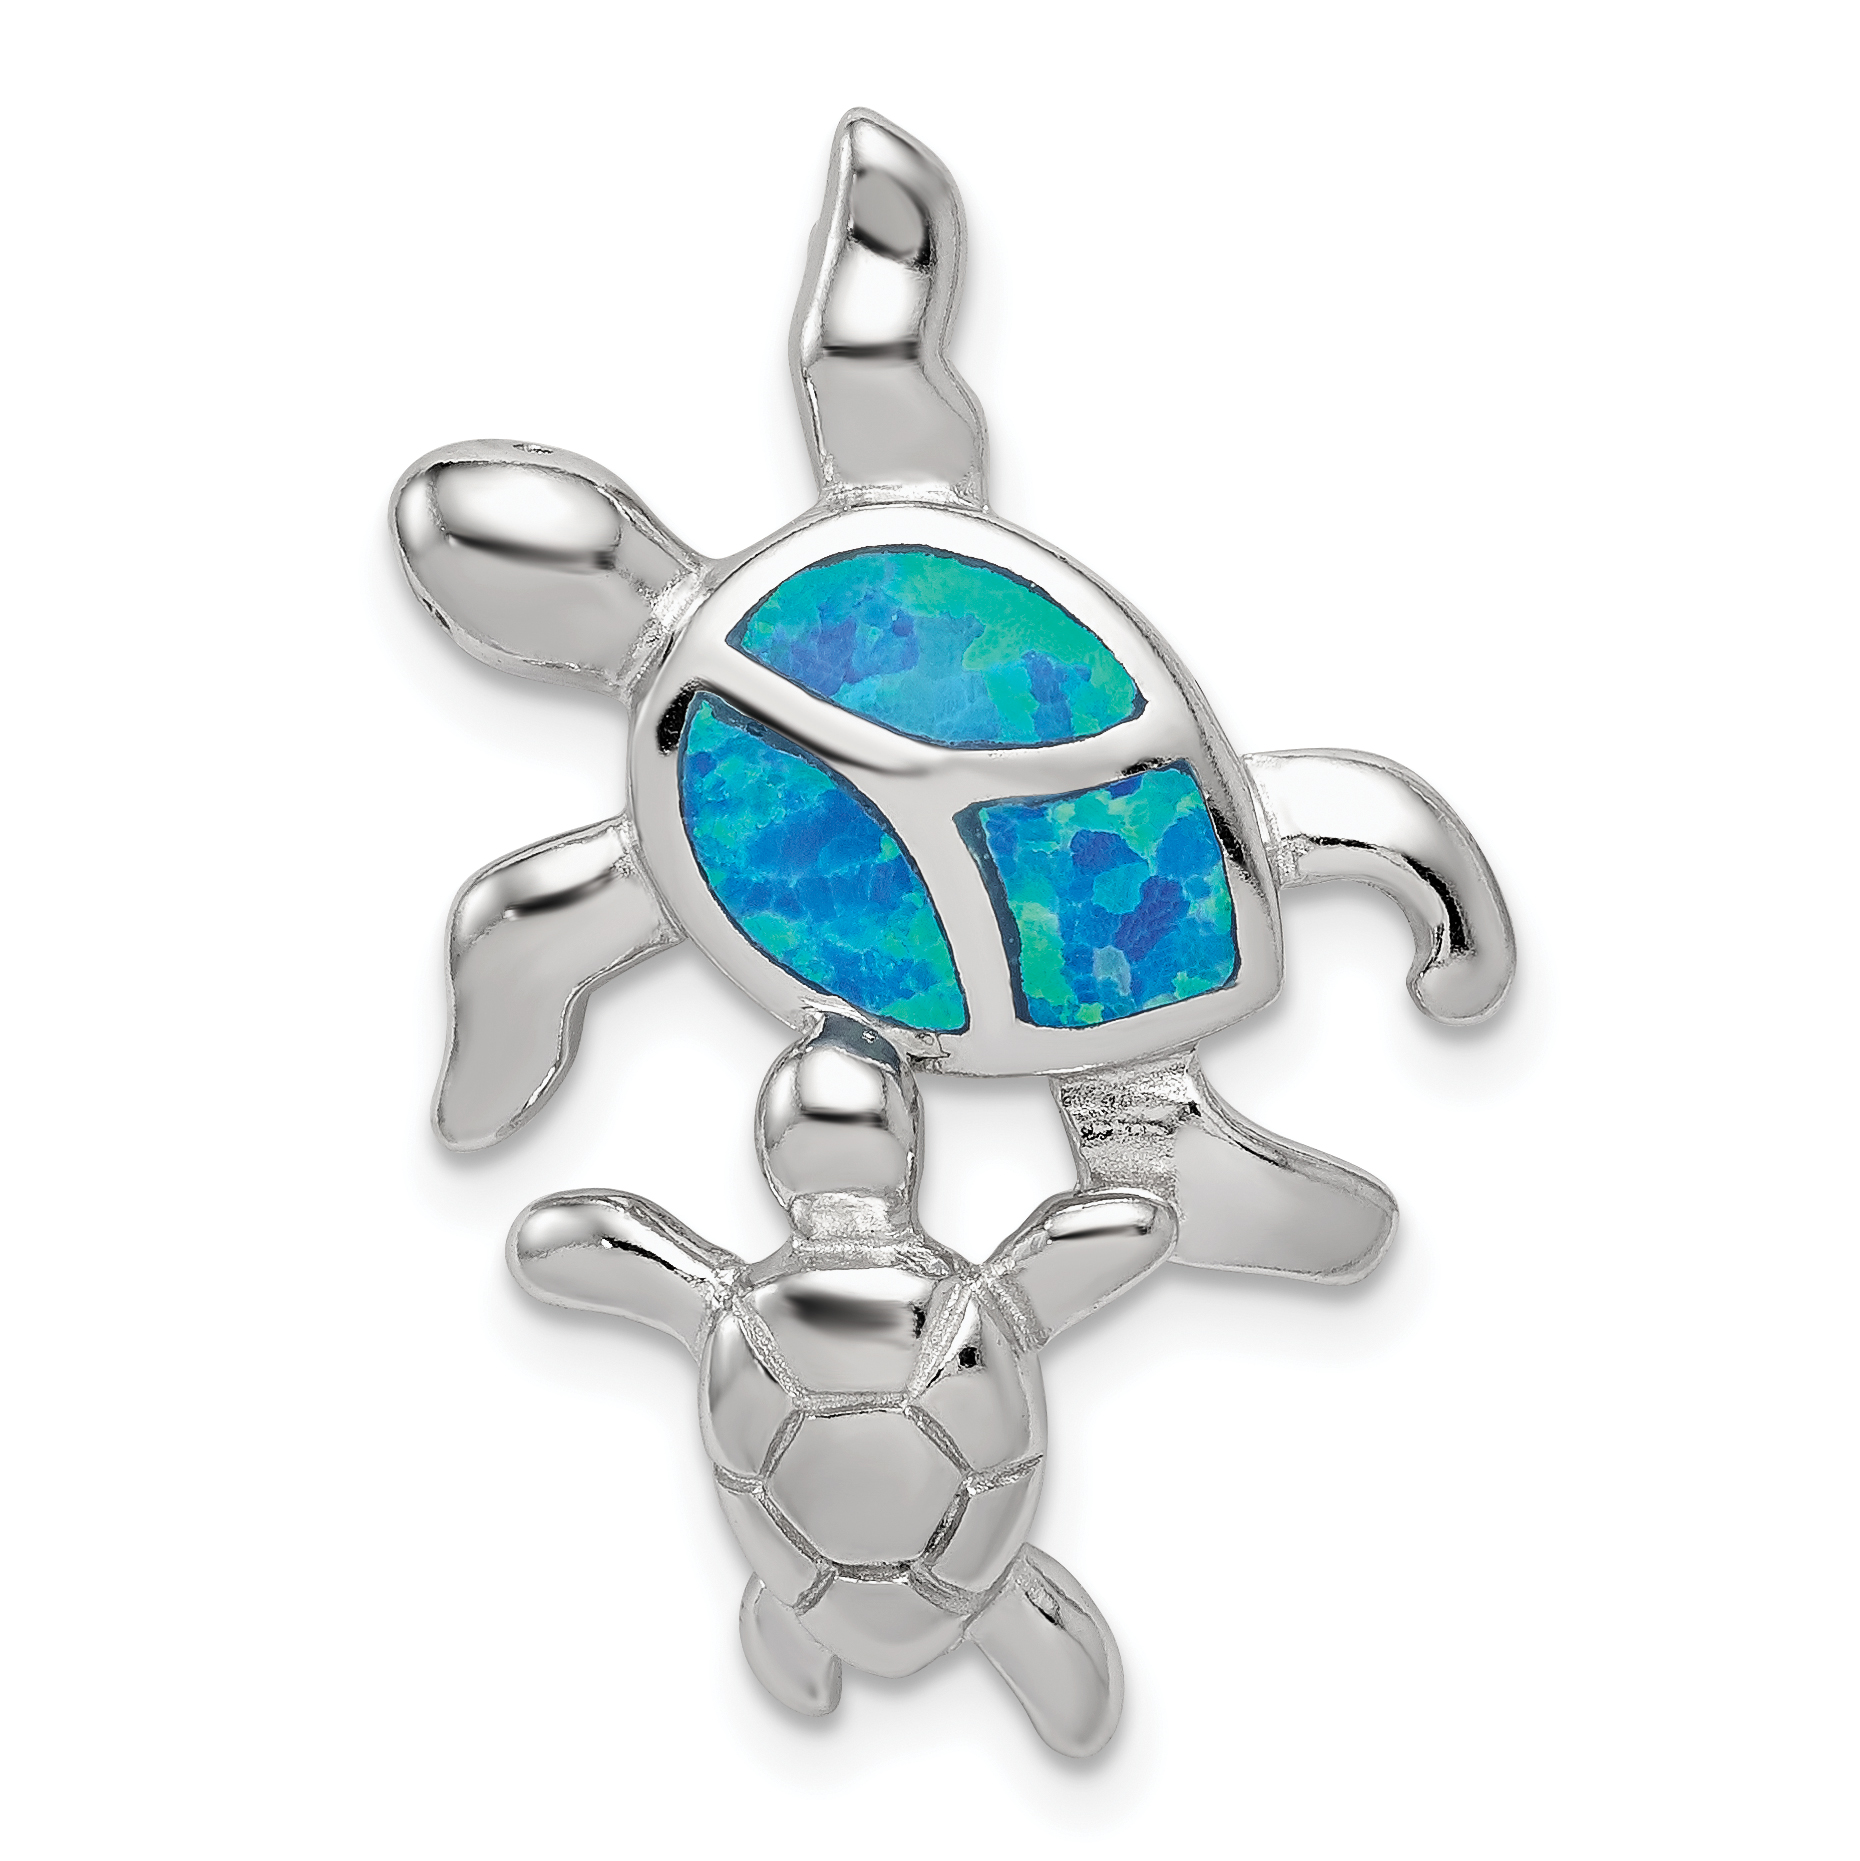 Women Boho Turquoise Rhinestone Turtle Pendant Silver Plated Chain Necklace Gift